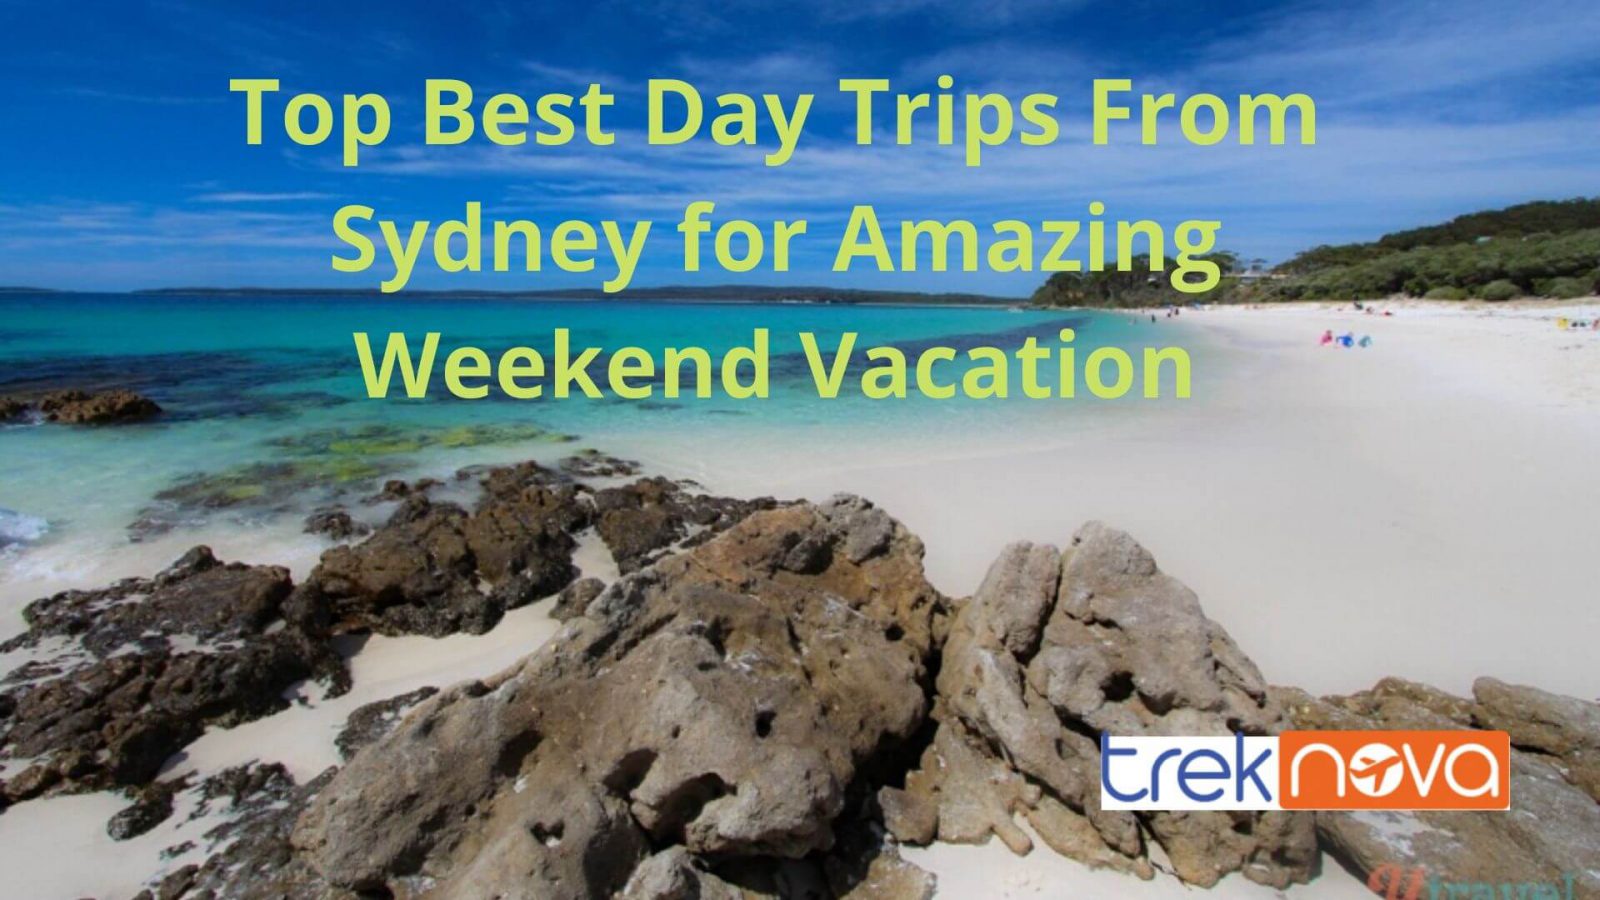 Top 12 Best Day Trips From Sydney for Amazing Weekend Vacation